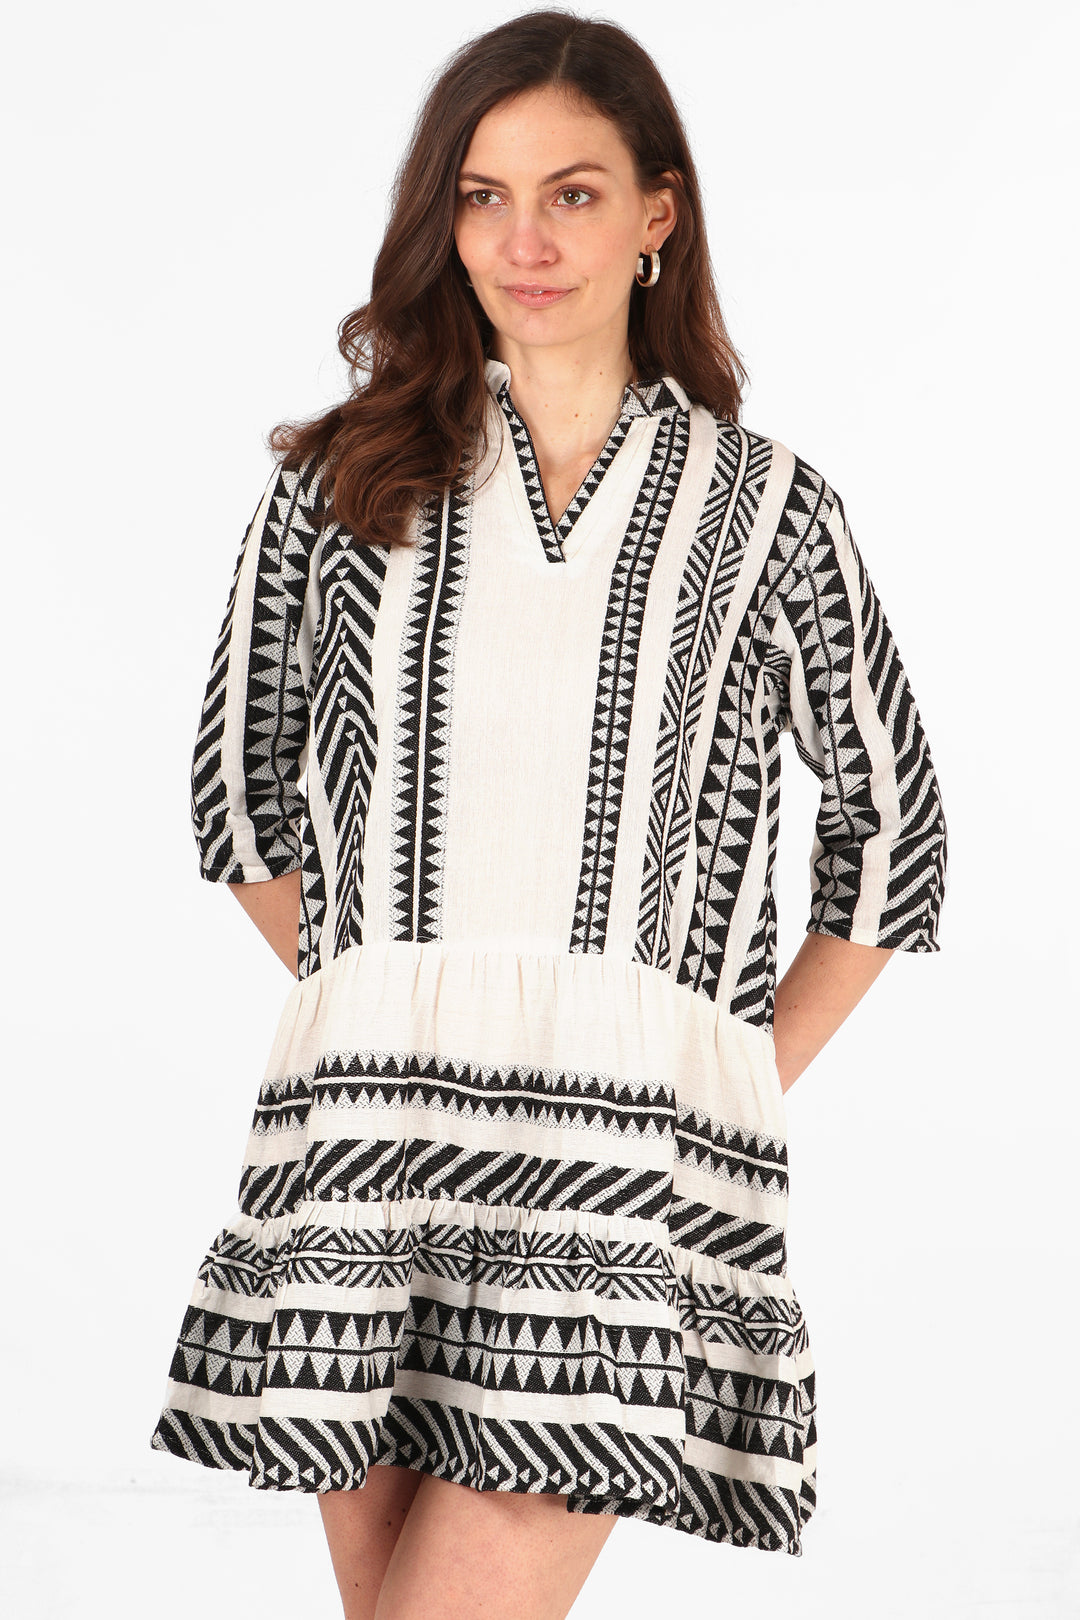 model wearing a black and white midi dress with an aztec print pattern and 3/4 sleeves